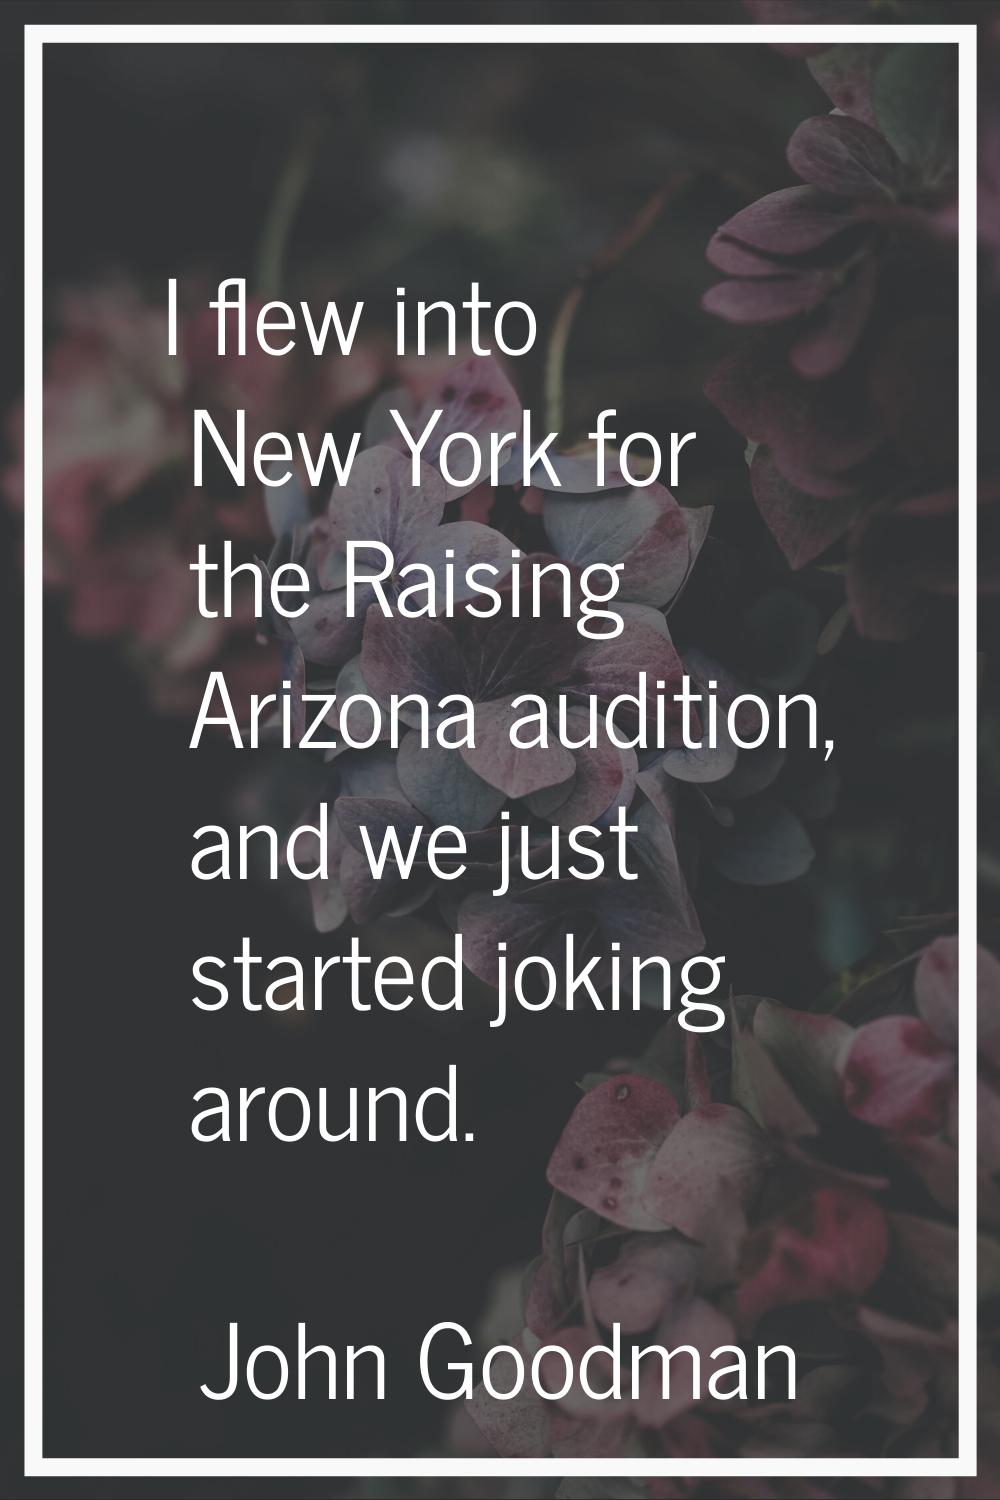 I flew into New York for the Raising Arizona audition, and we just started joking around.